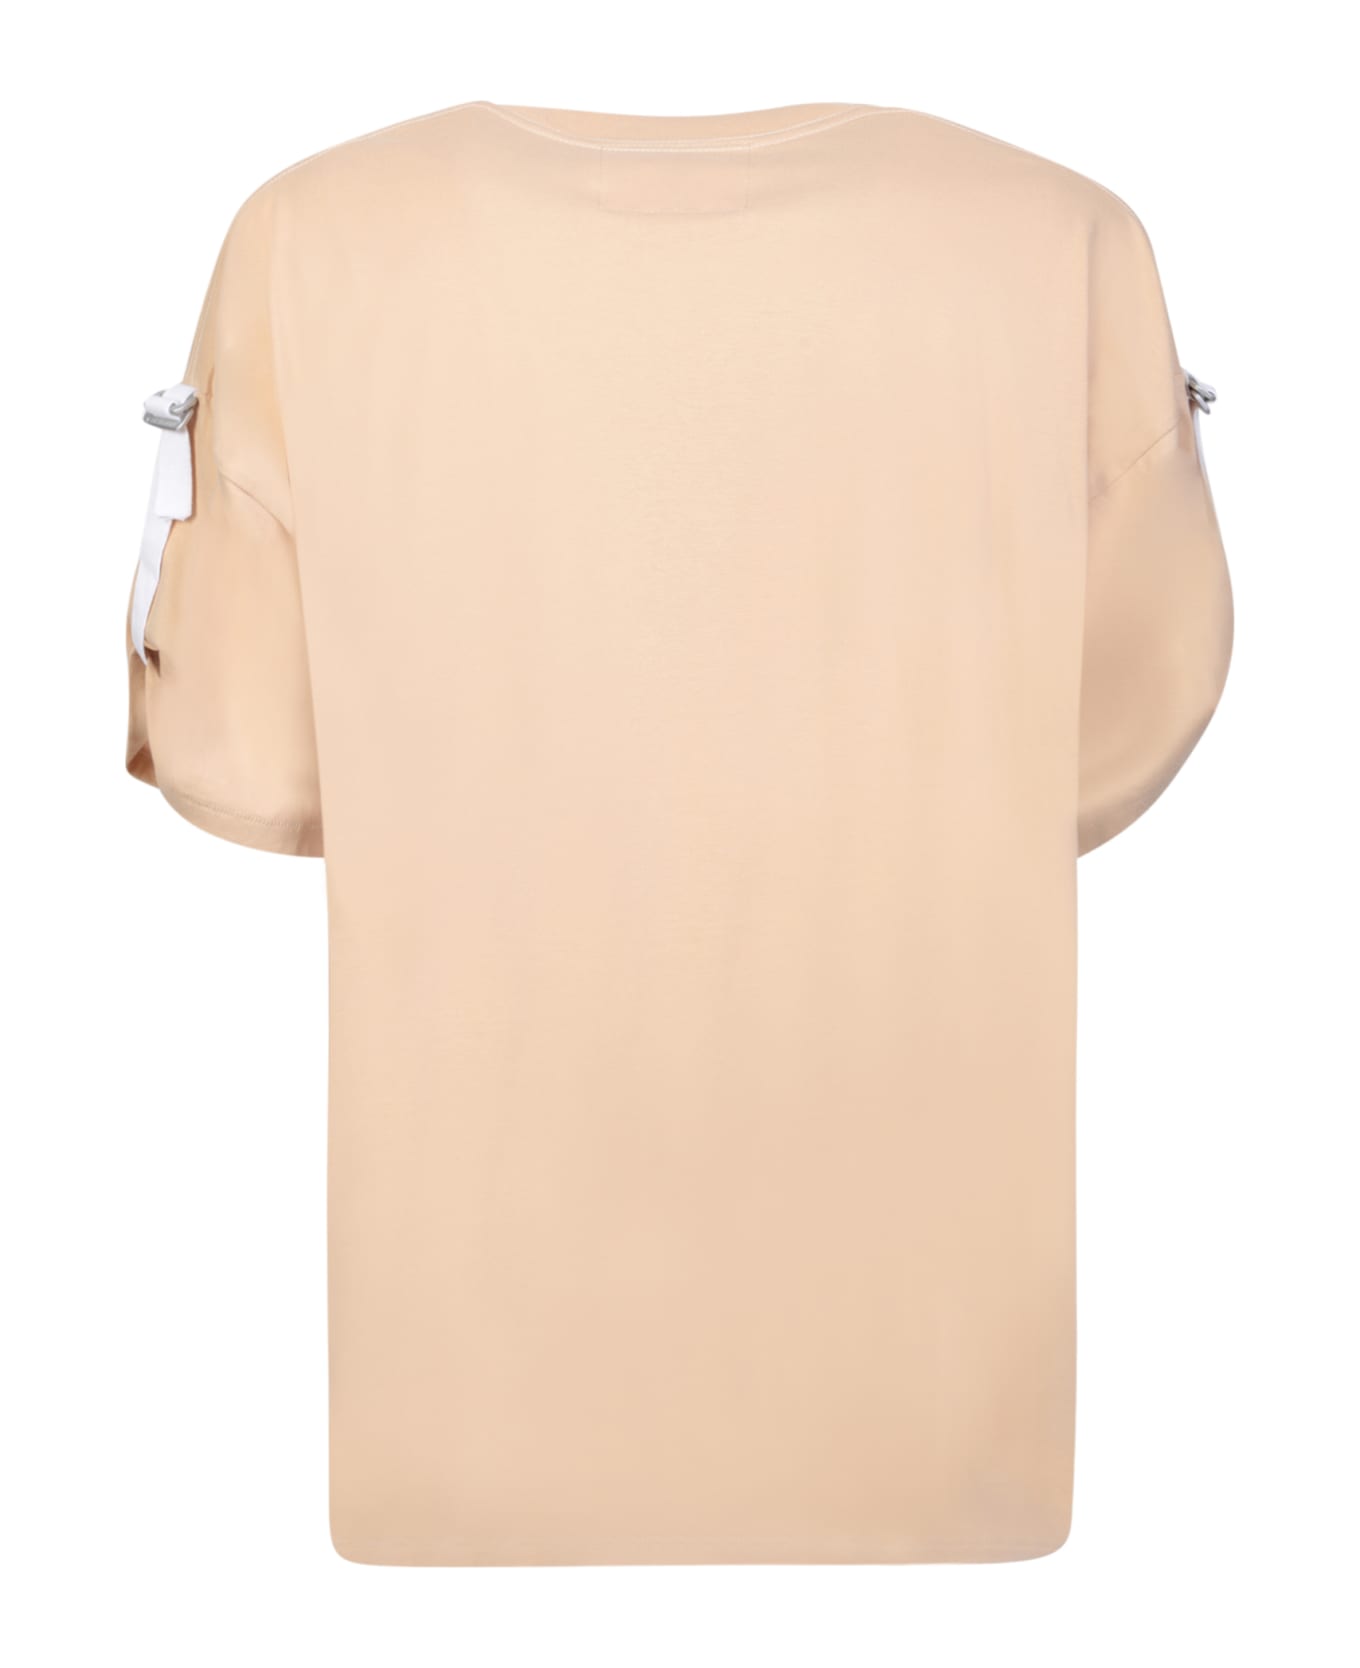 The Salvages From & Function D-ring Pink T-shirt - Beige